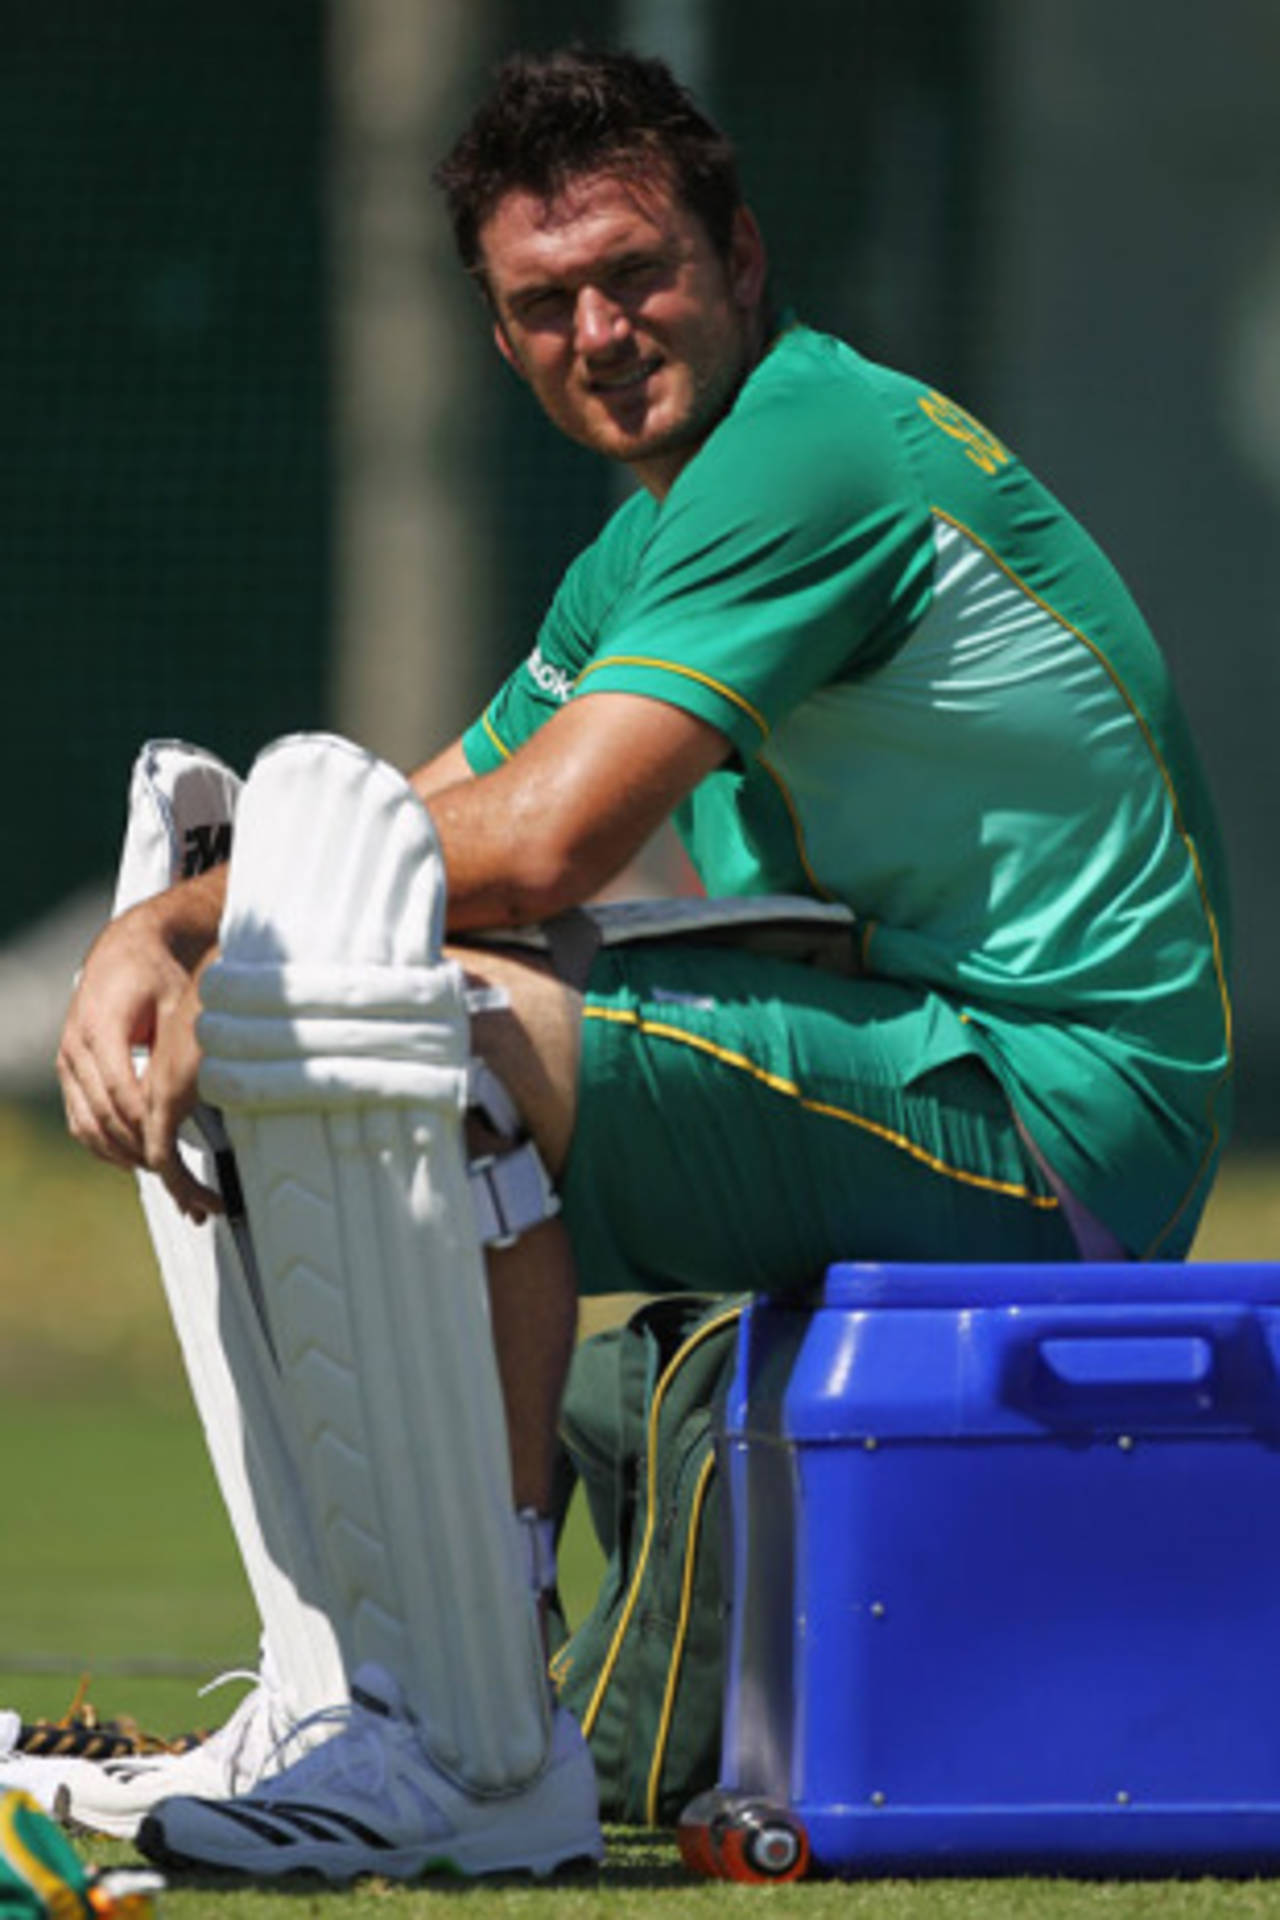 Graeme Smith needs history to repeat at Newlands if South Africa are to get back in the series, Cape Town, January 2, 2010